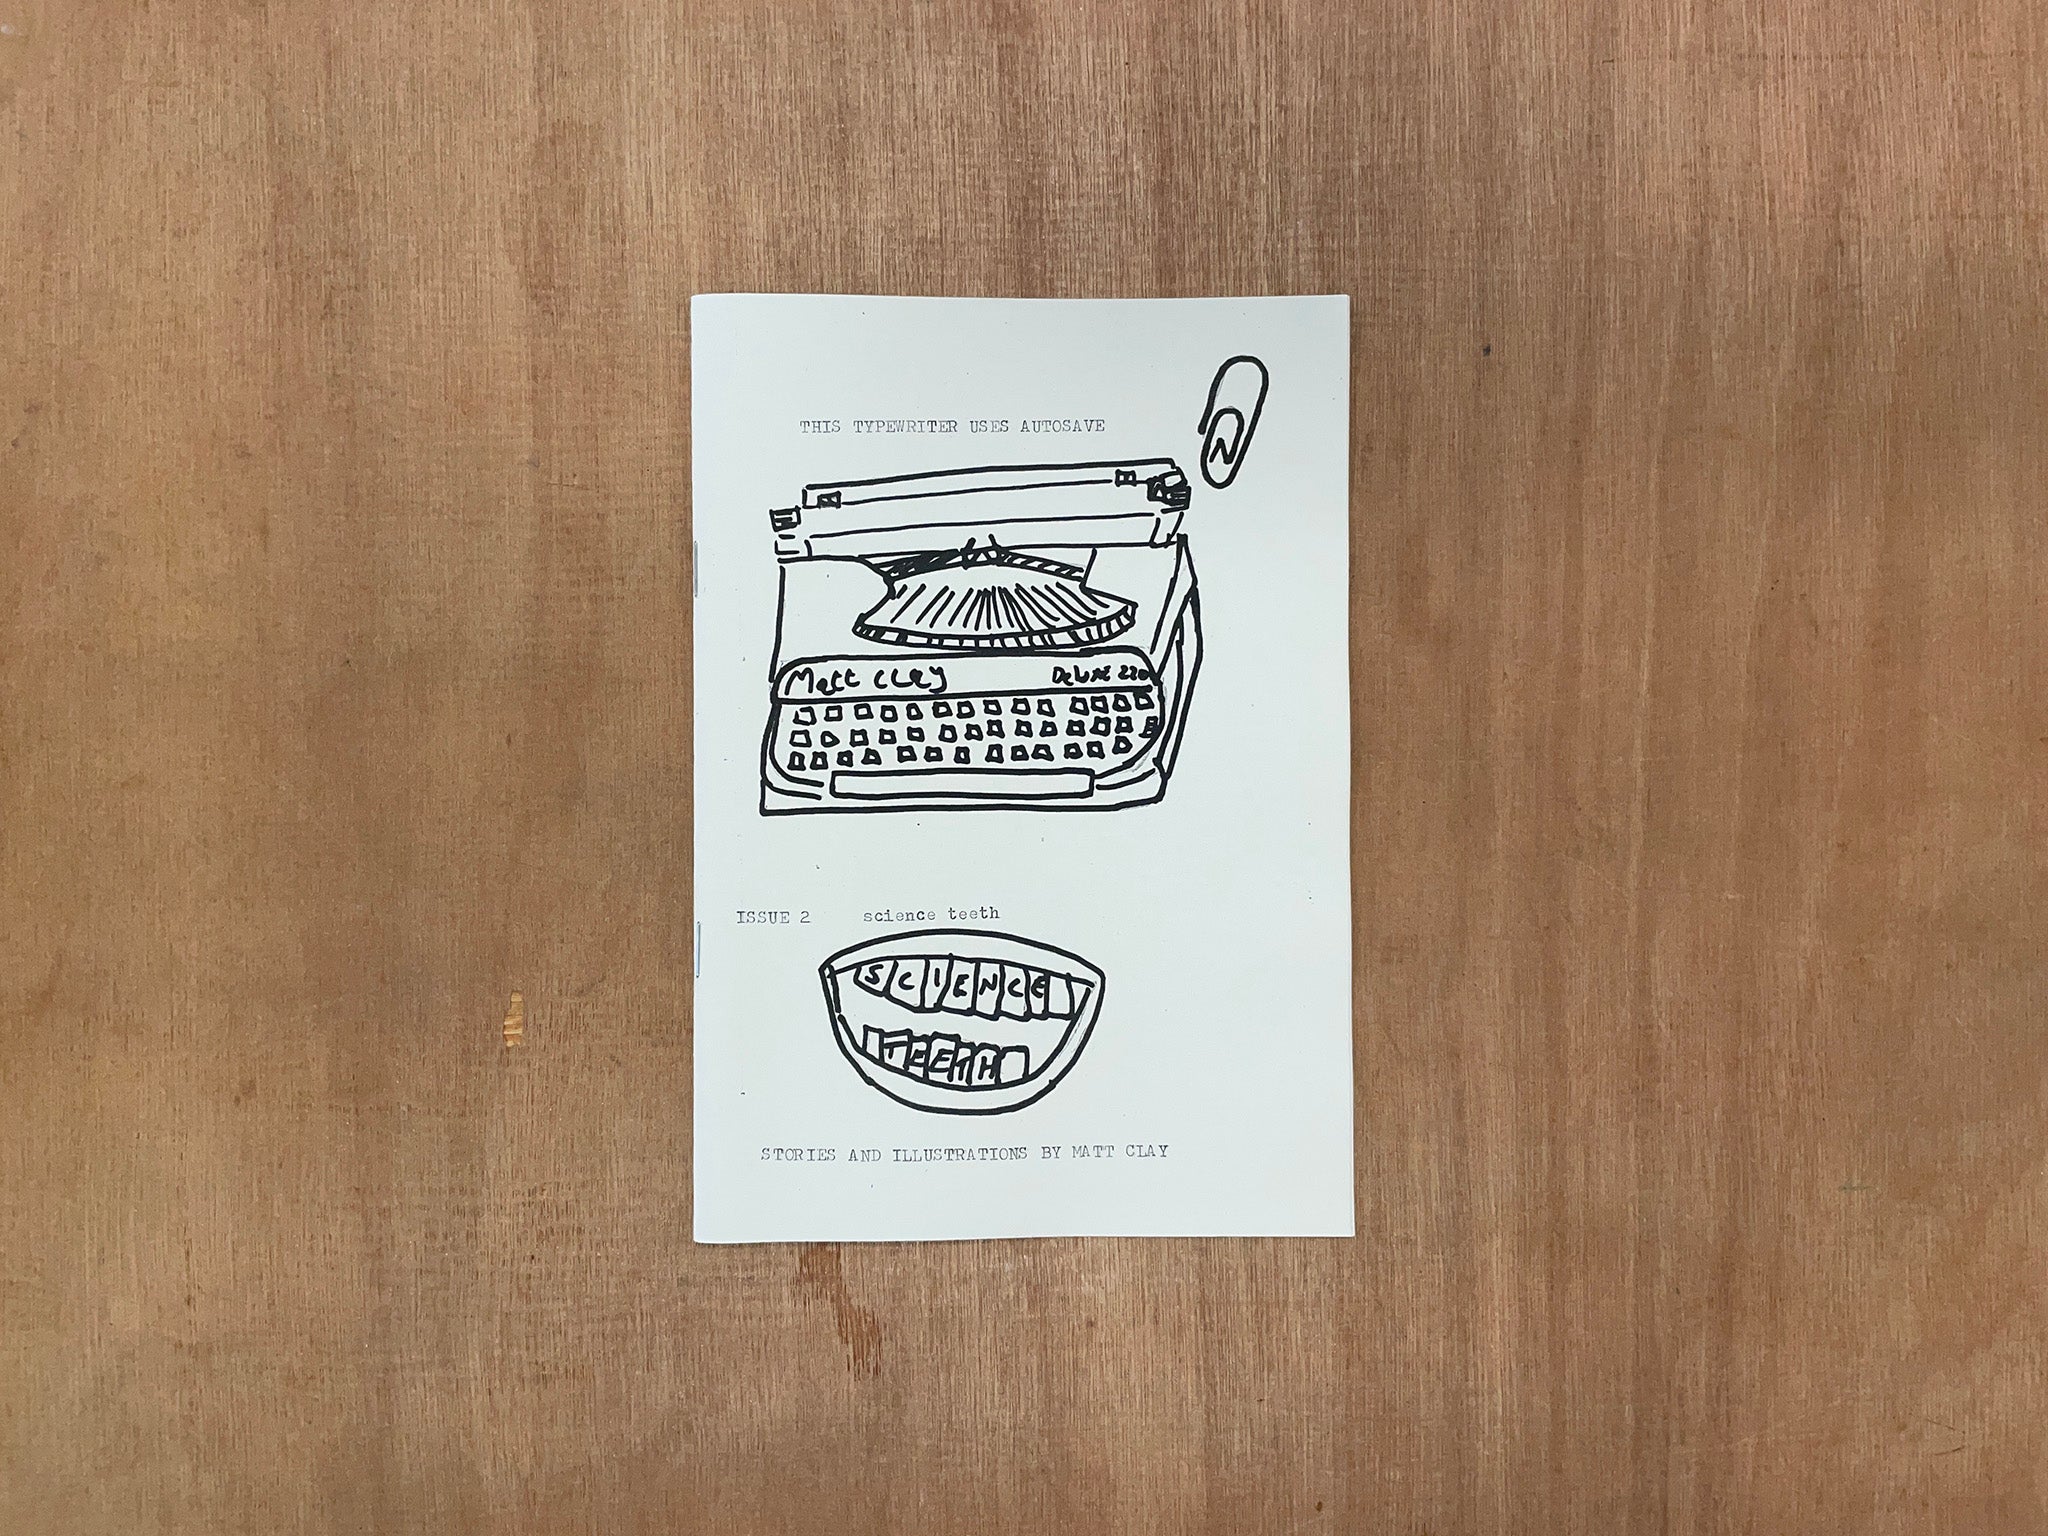 THIS TYPEWRITER USES AUTOSAVE ISSUE 2 - SCIENCE TEETH by Matt Clay